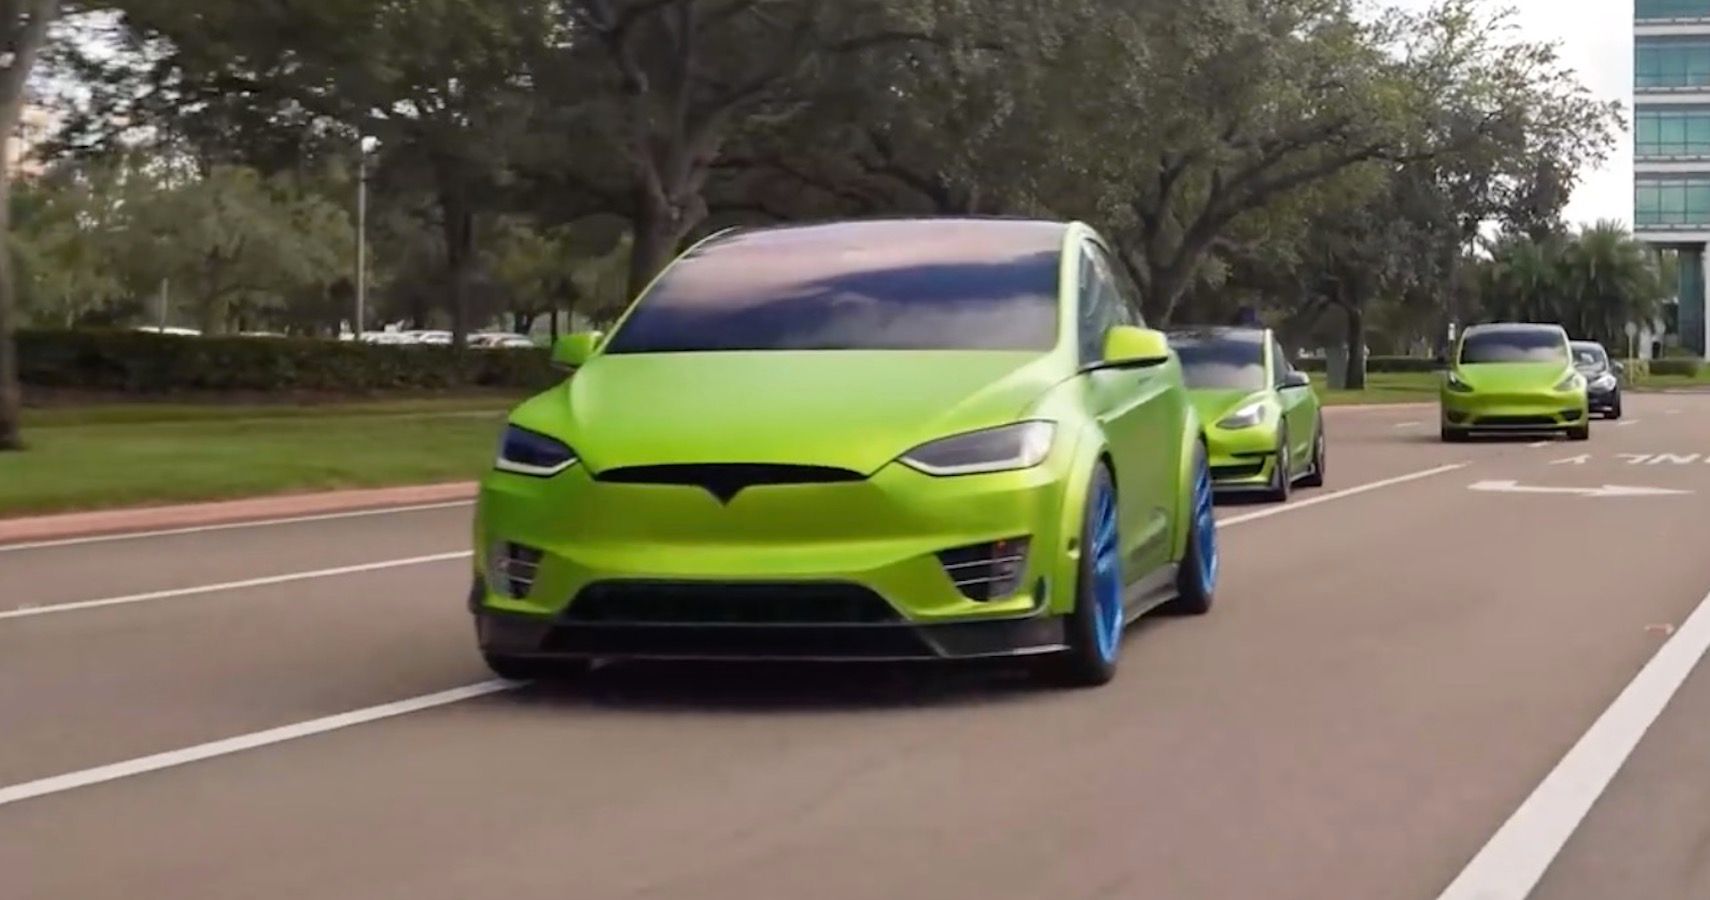 Ludicrously Modified Tesla Model X Hits 121 MPH And A Quarter Mile In